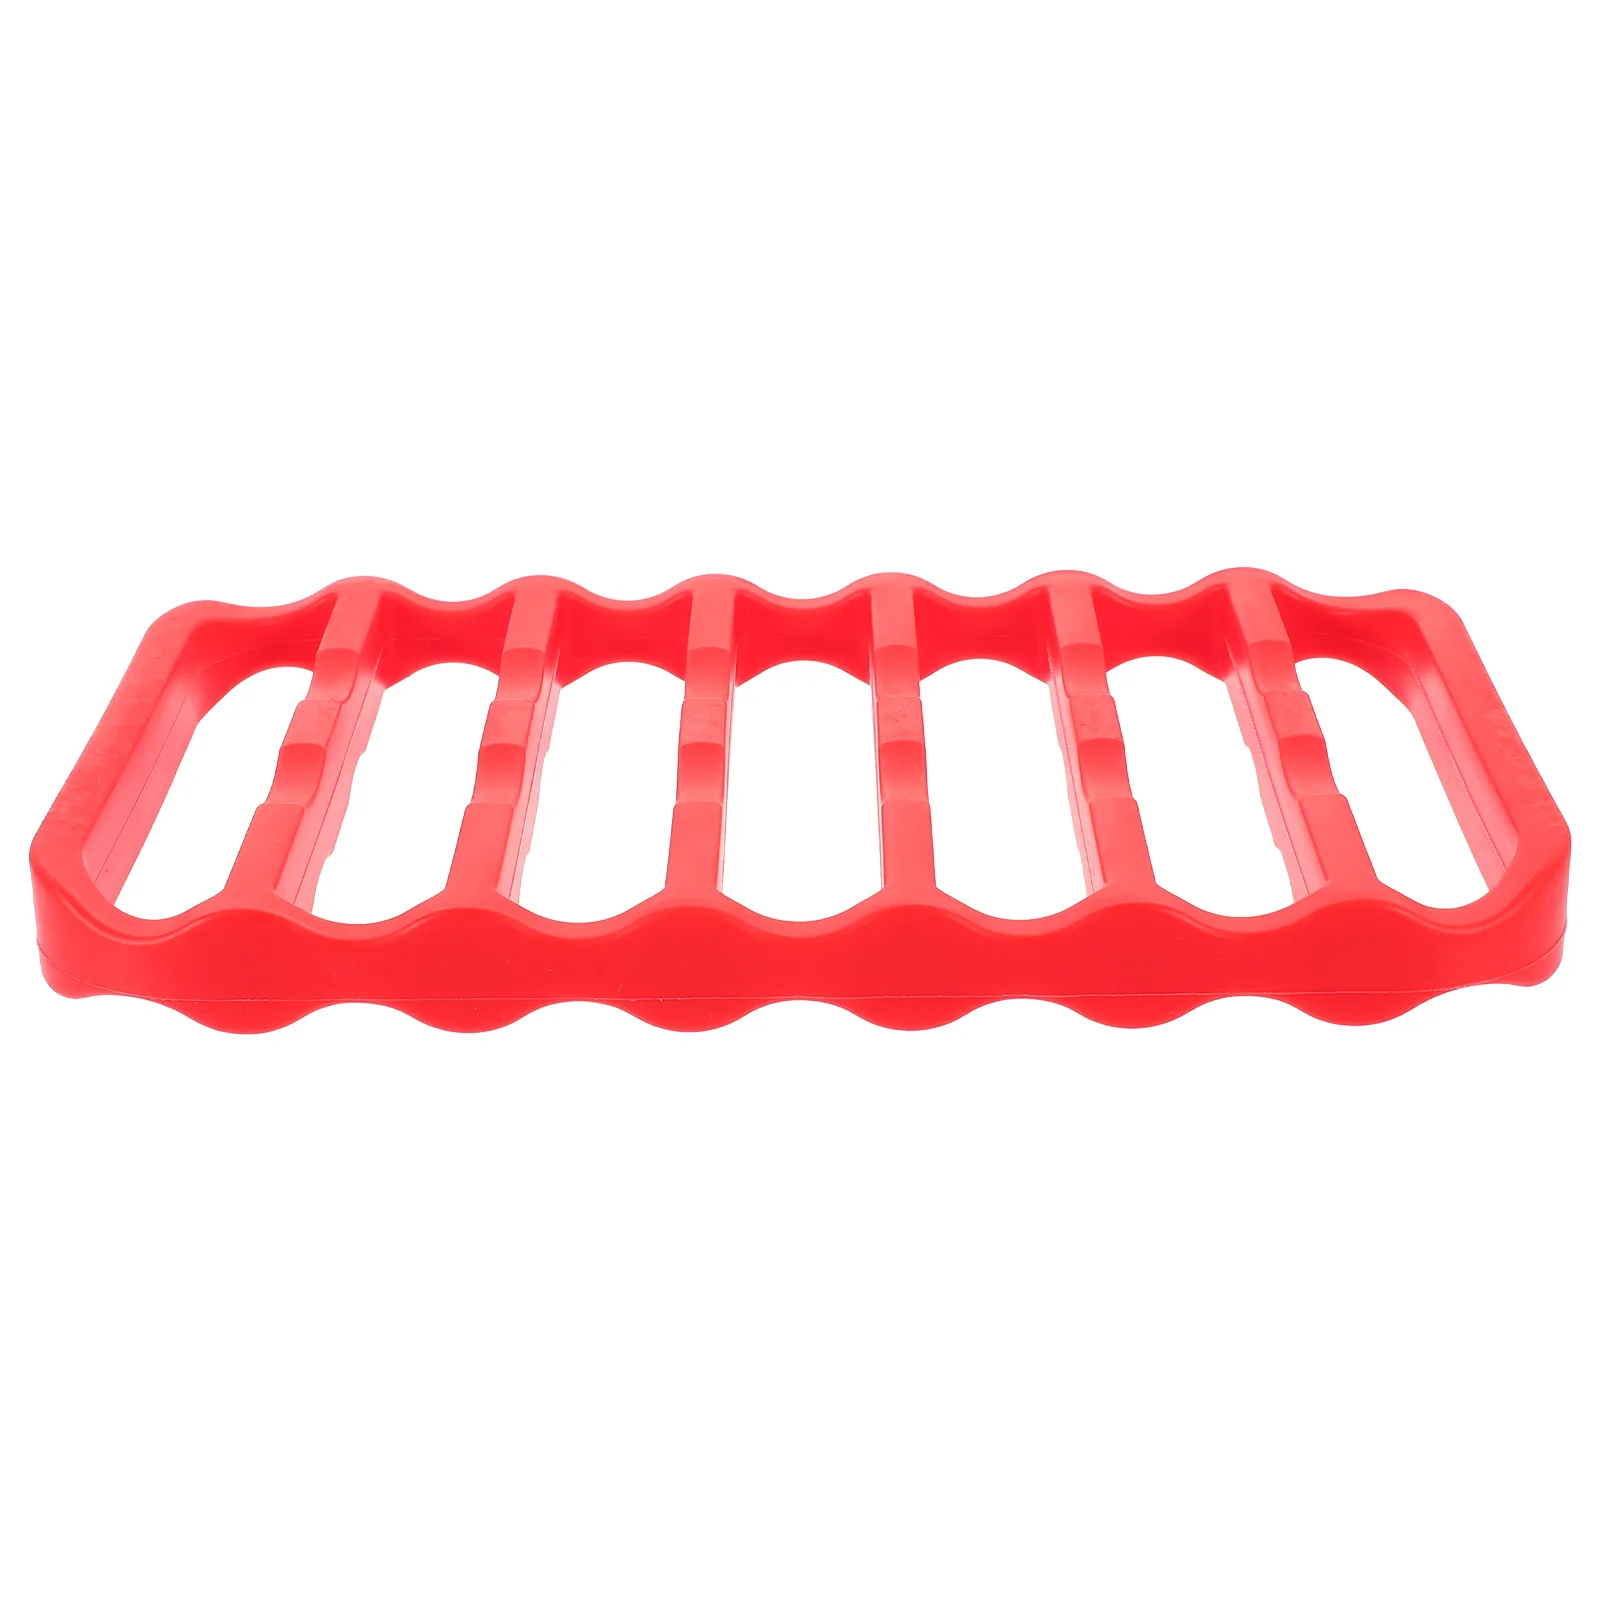 

Silicone Placemat Anti-skid Place Mat Roasting Rack Table Hot Dish Mat Silicone Draining Mat